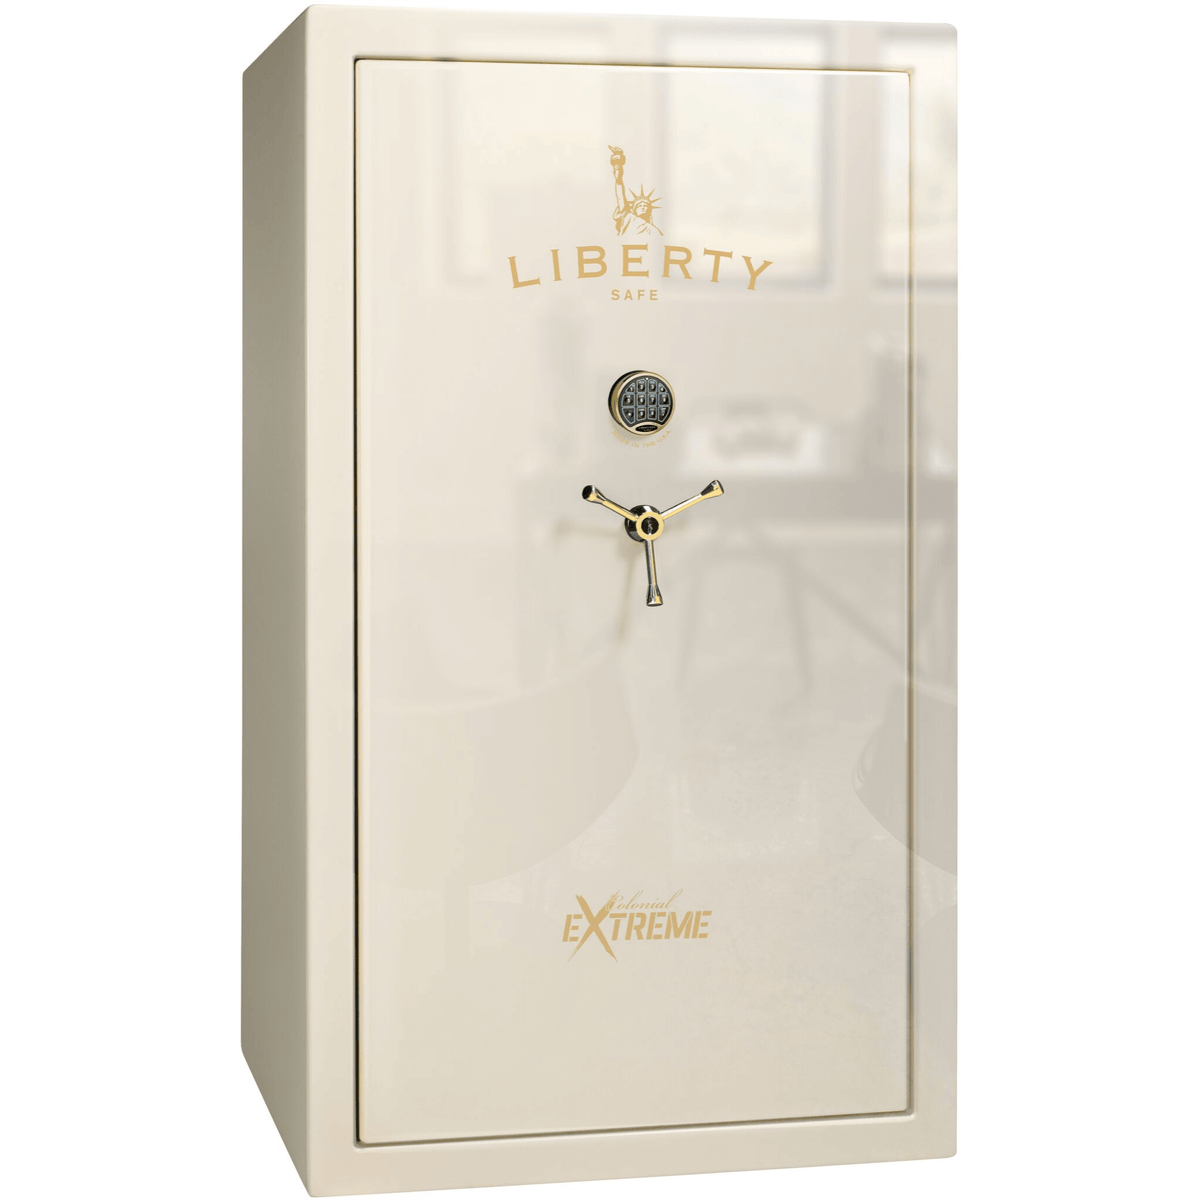 Liberty Colonial 50 Extreme Safe in White Gloss with Brass Electronic Lock.